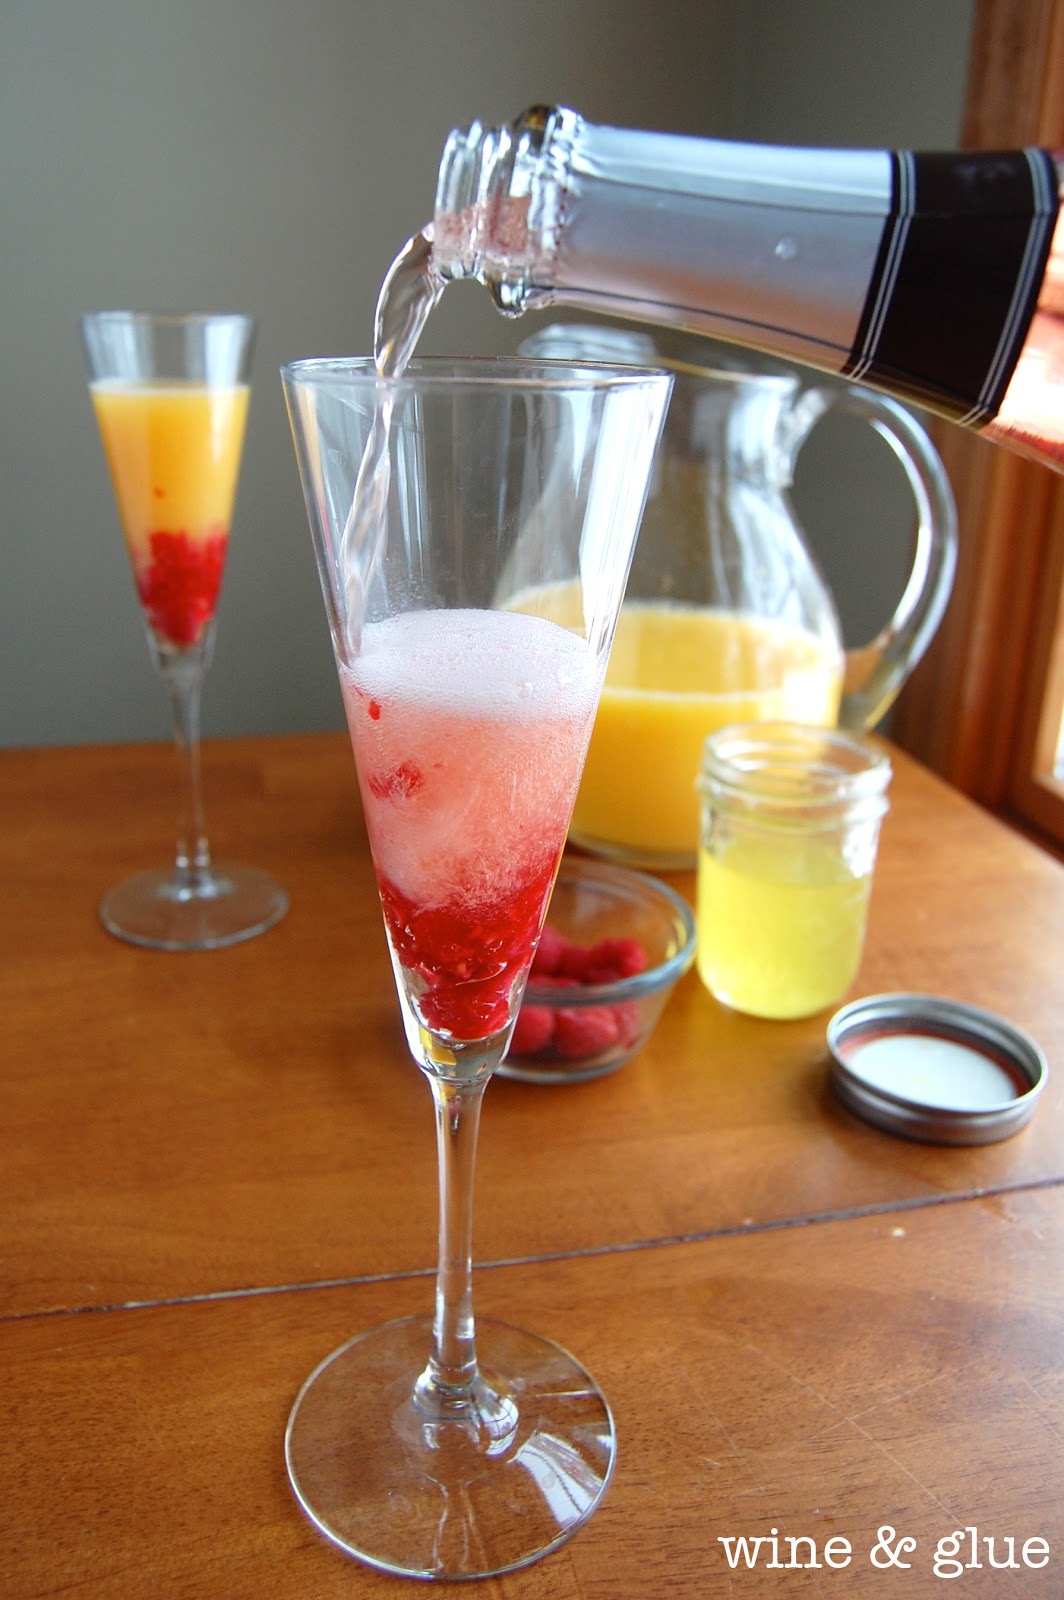 This Sunrise Mimosa cocktail is fruity, beautiful and totally refreshing. Super easy to make and tastes delicious!